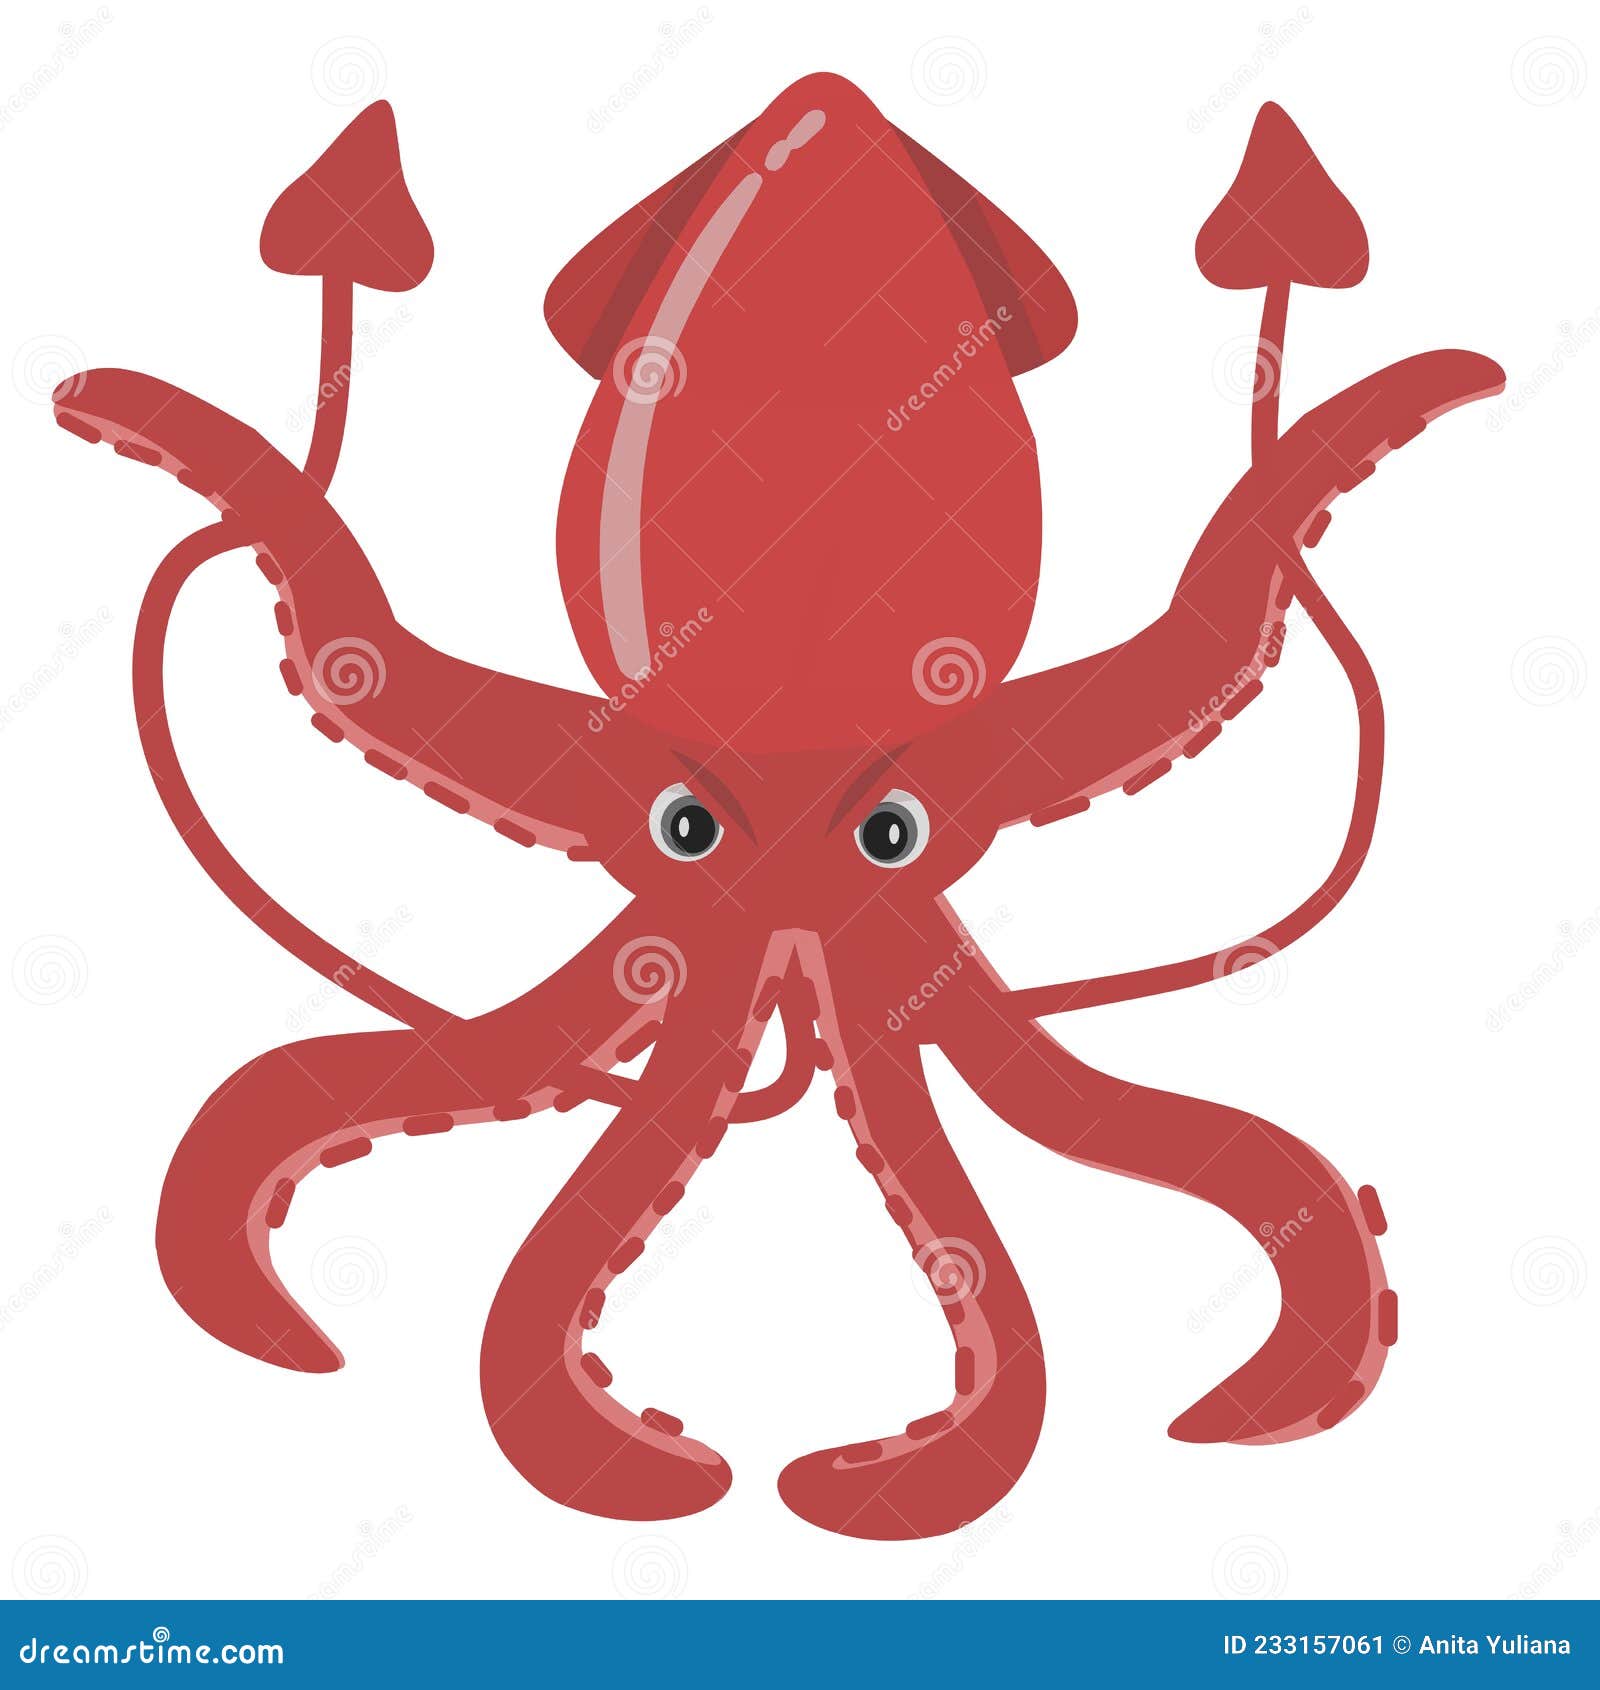 An Angry Red Squid Cartoon Illustration. Isolated. Cute Drawing